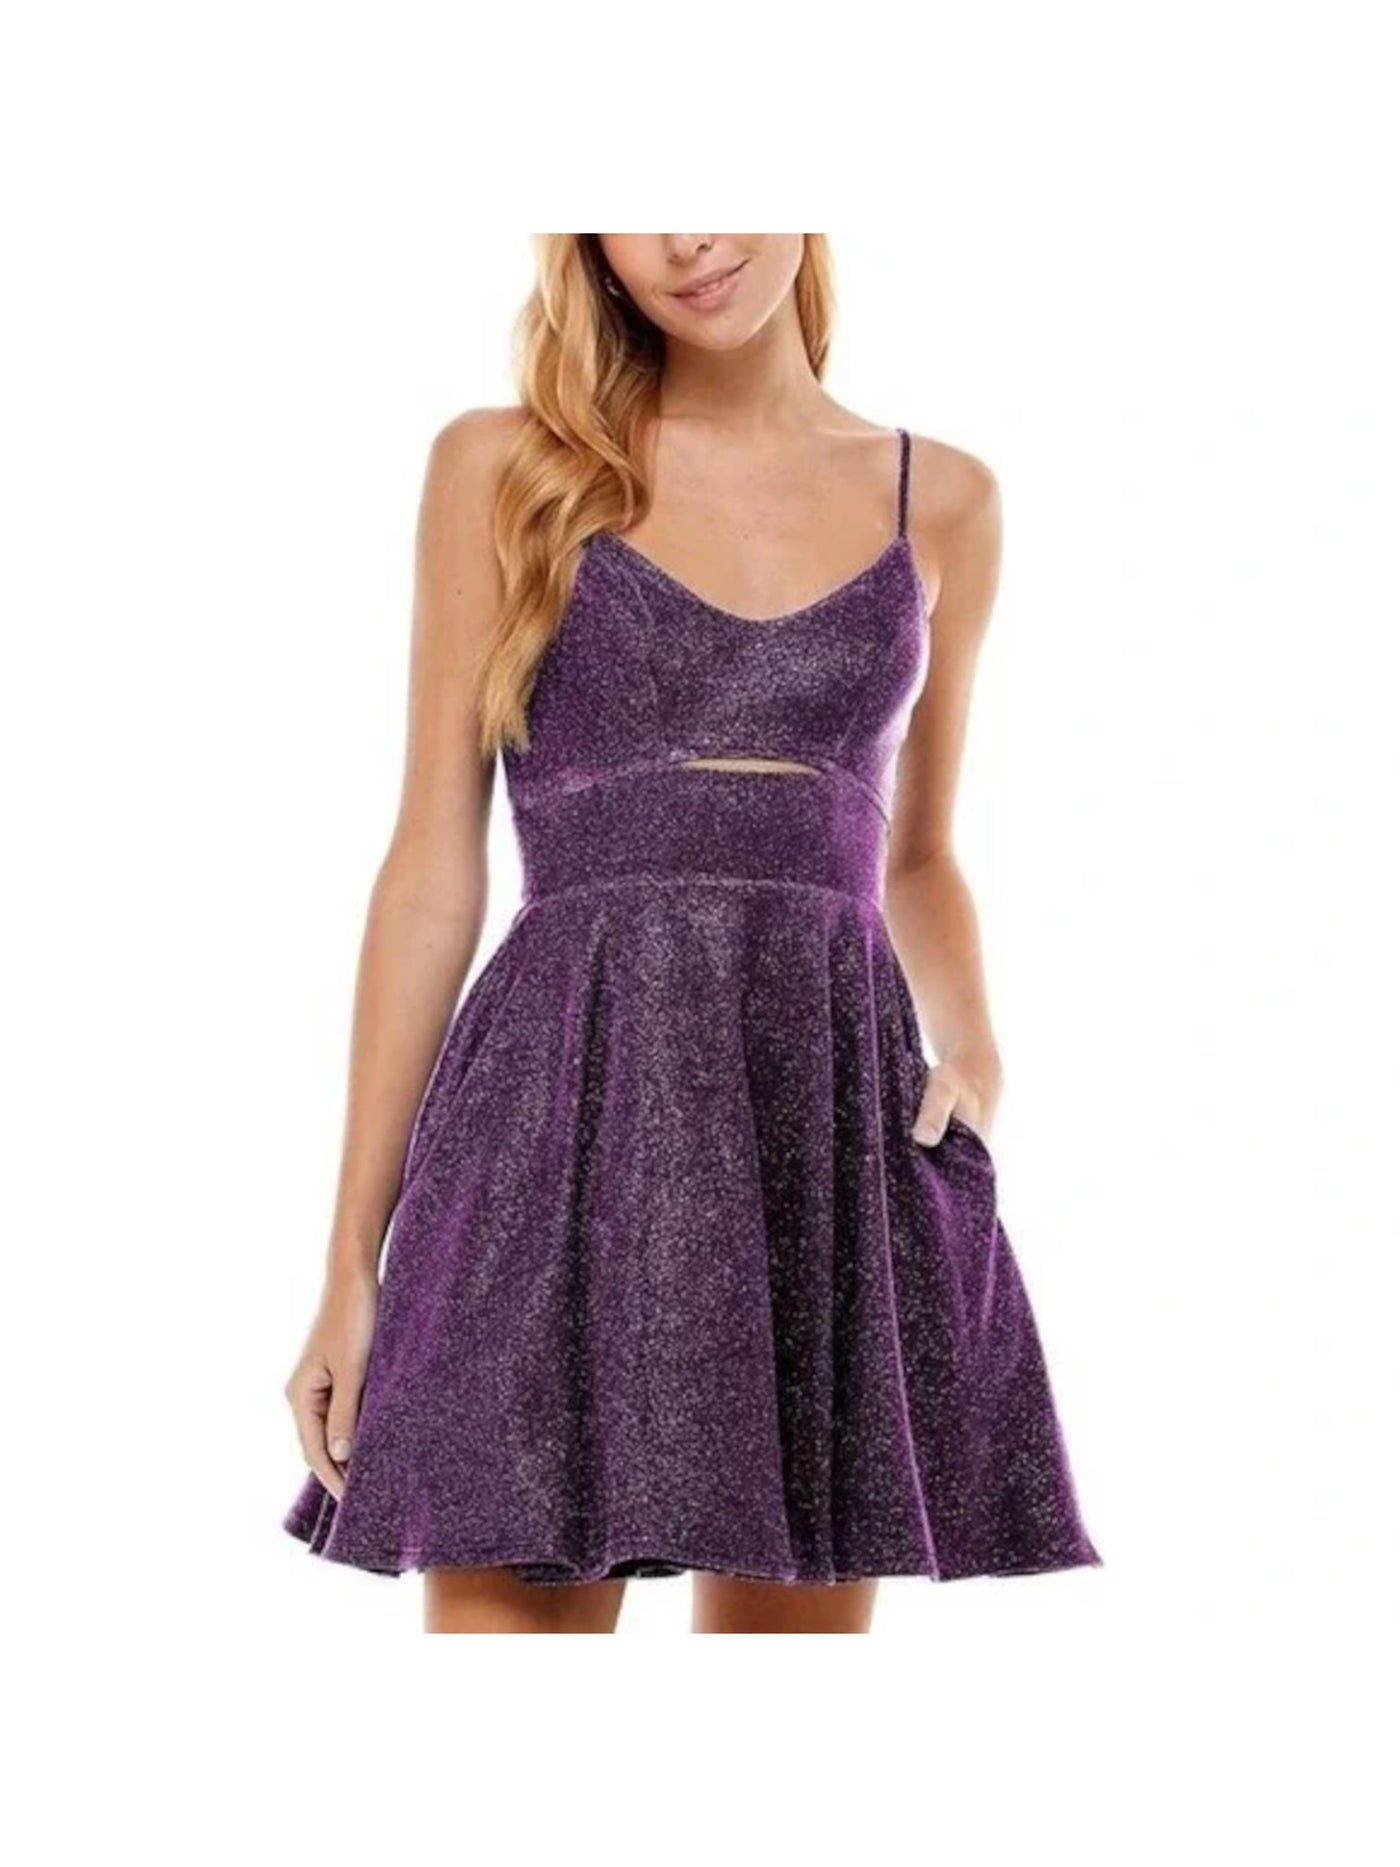 CITY STUDIO Womens Purple Metallic Zippered Lined Cut Out Spaghetti Strap Scoop Neck Short Party Fit + Flare Dress Juniors 9